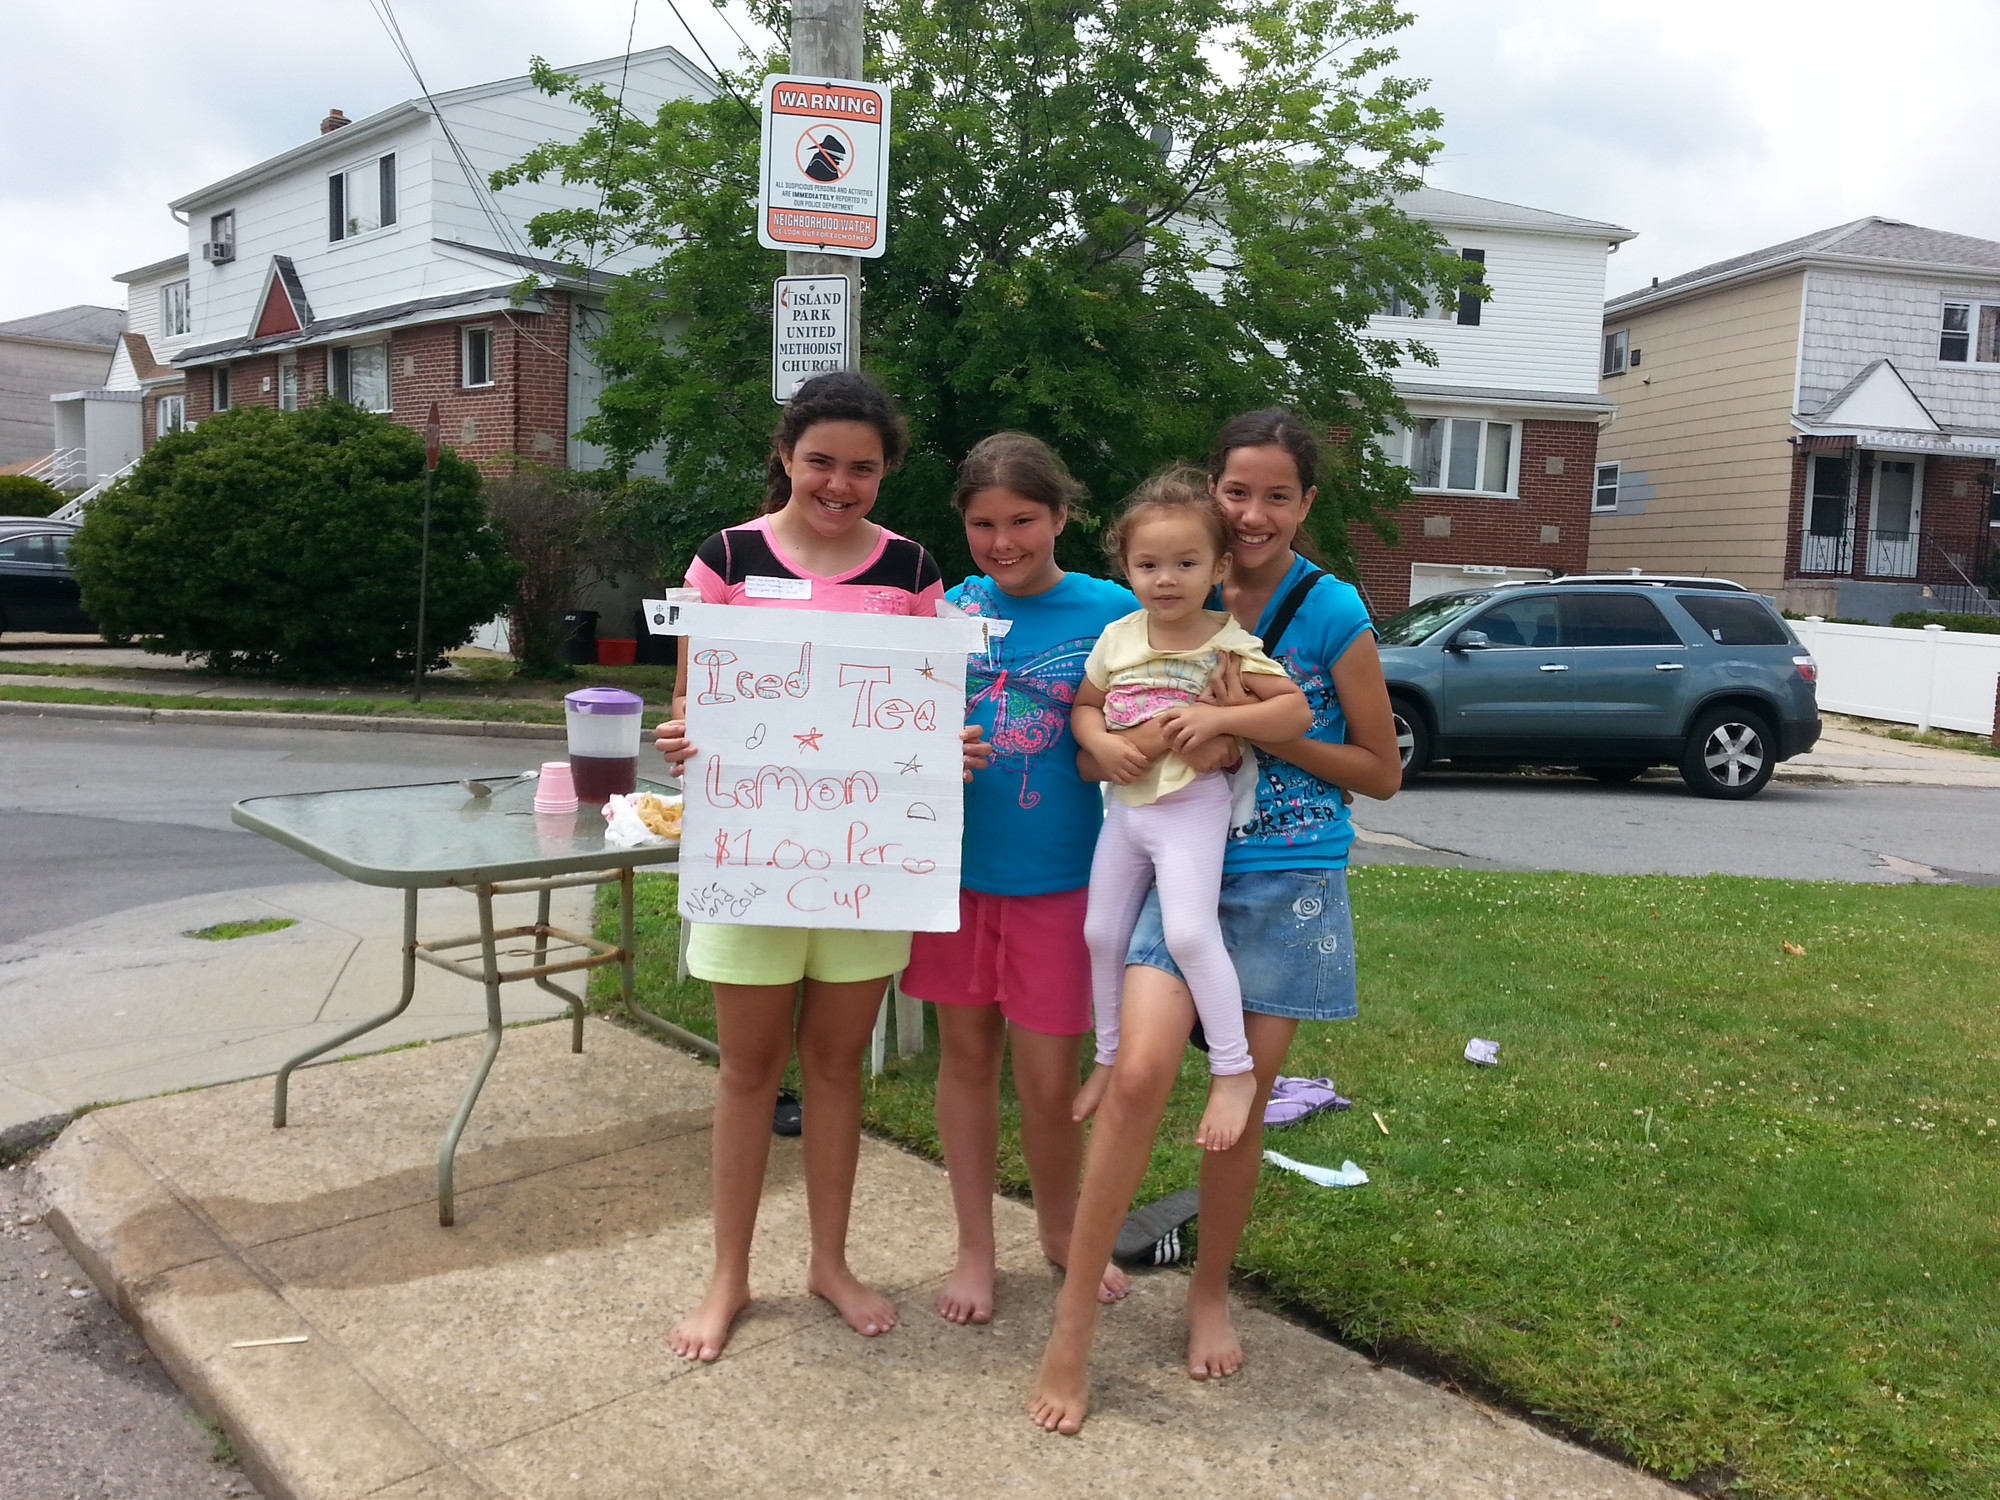 Four budding entrepreneurs, Lilly Vazquez, Mikayla Smith, Jarianna Tanon, and Sterlyn Tanon locate in Island Park.